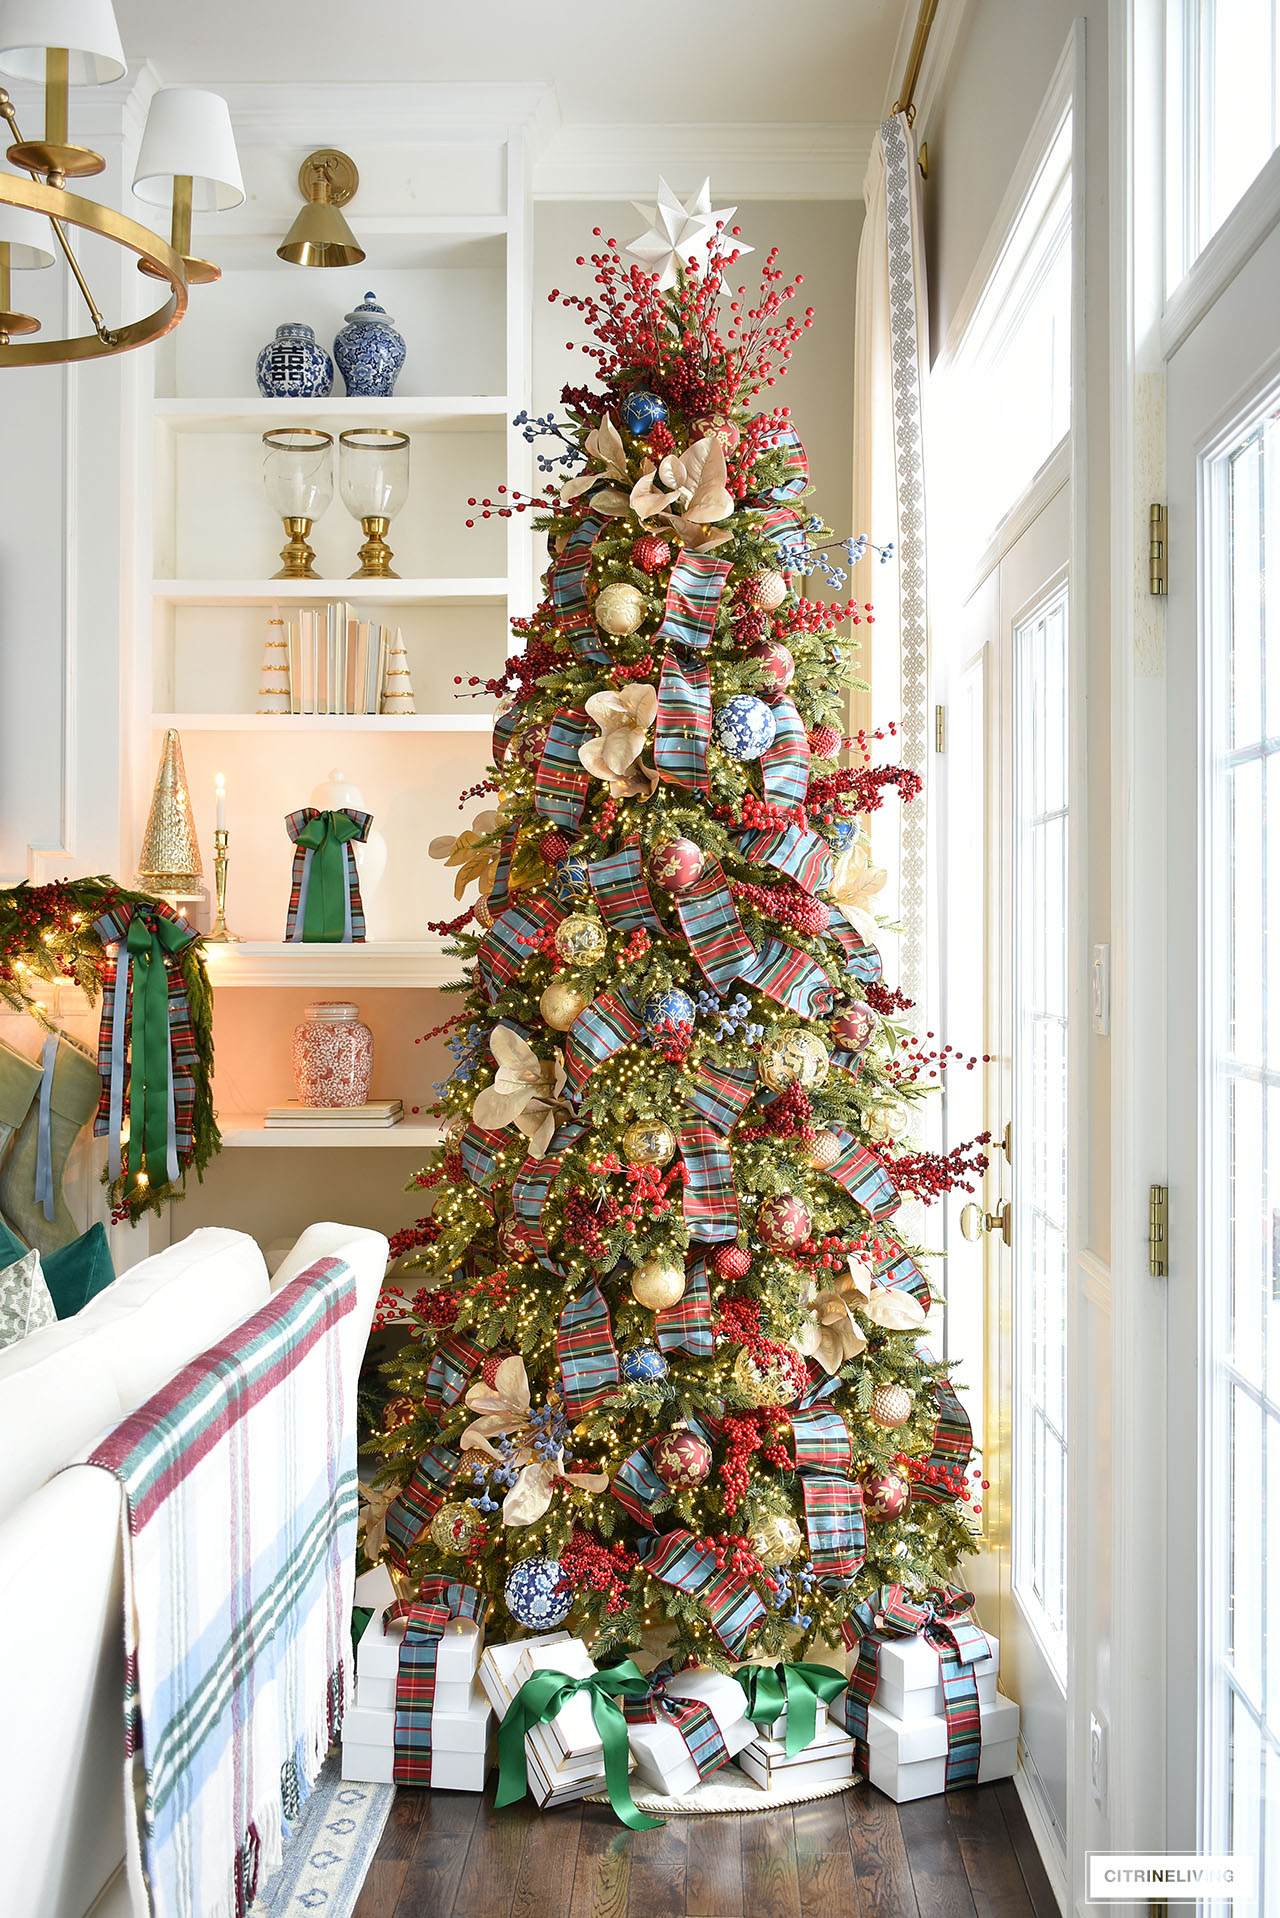 Gorgeous Christmas tree with red and blue plaid ribbon, red, blue and ld ornaments and red berry picks.